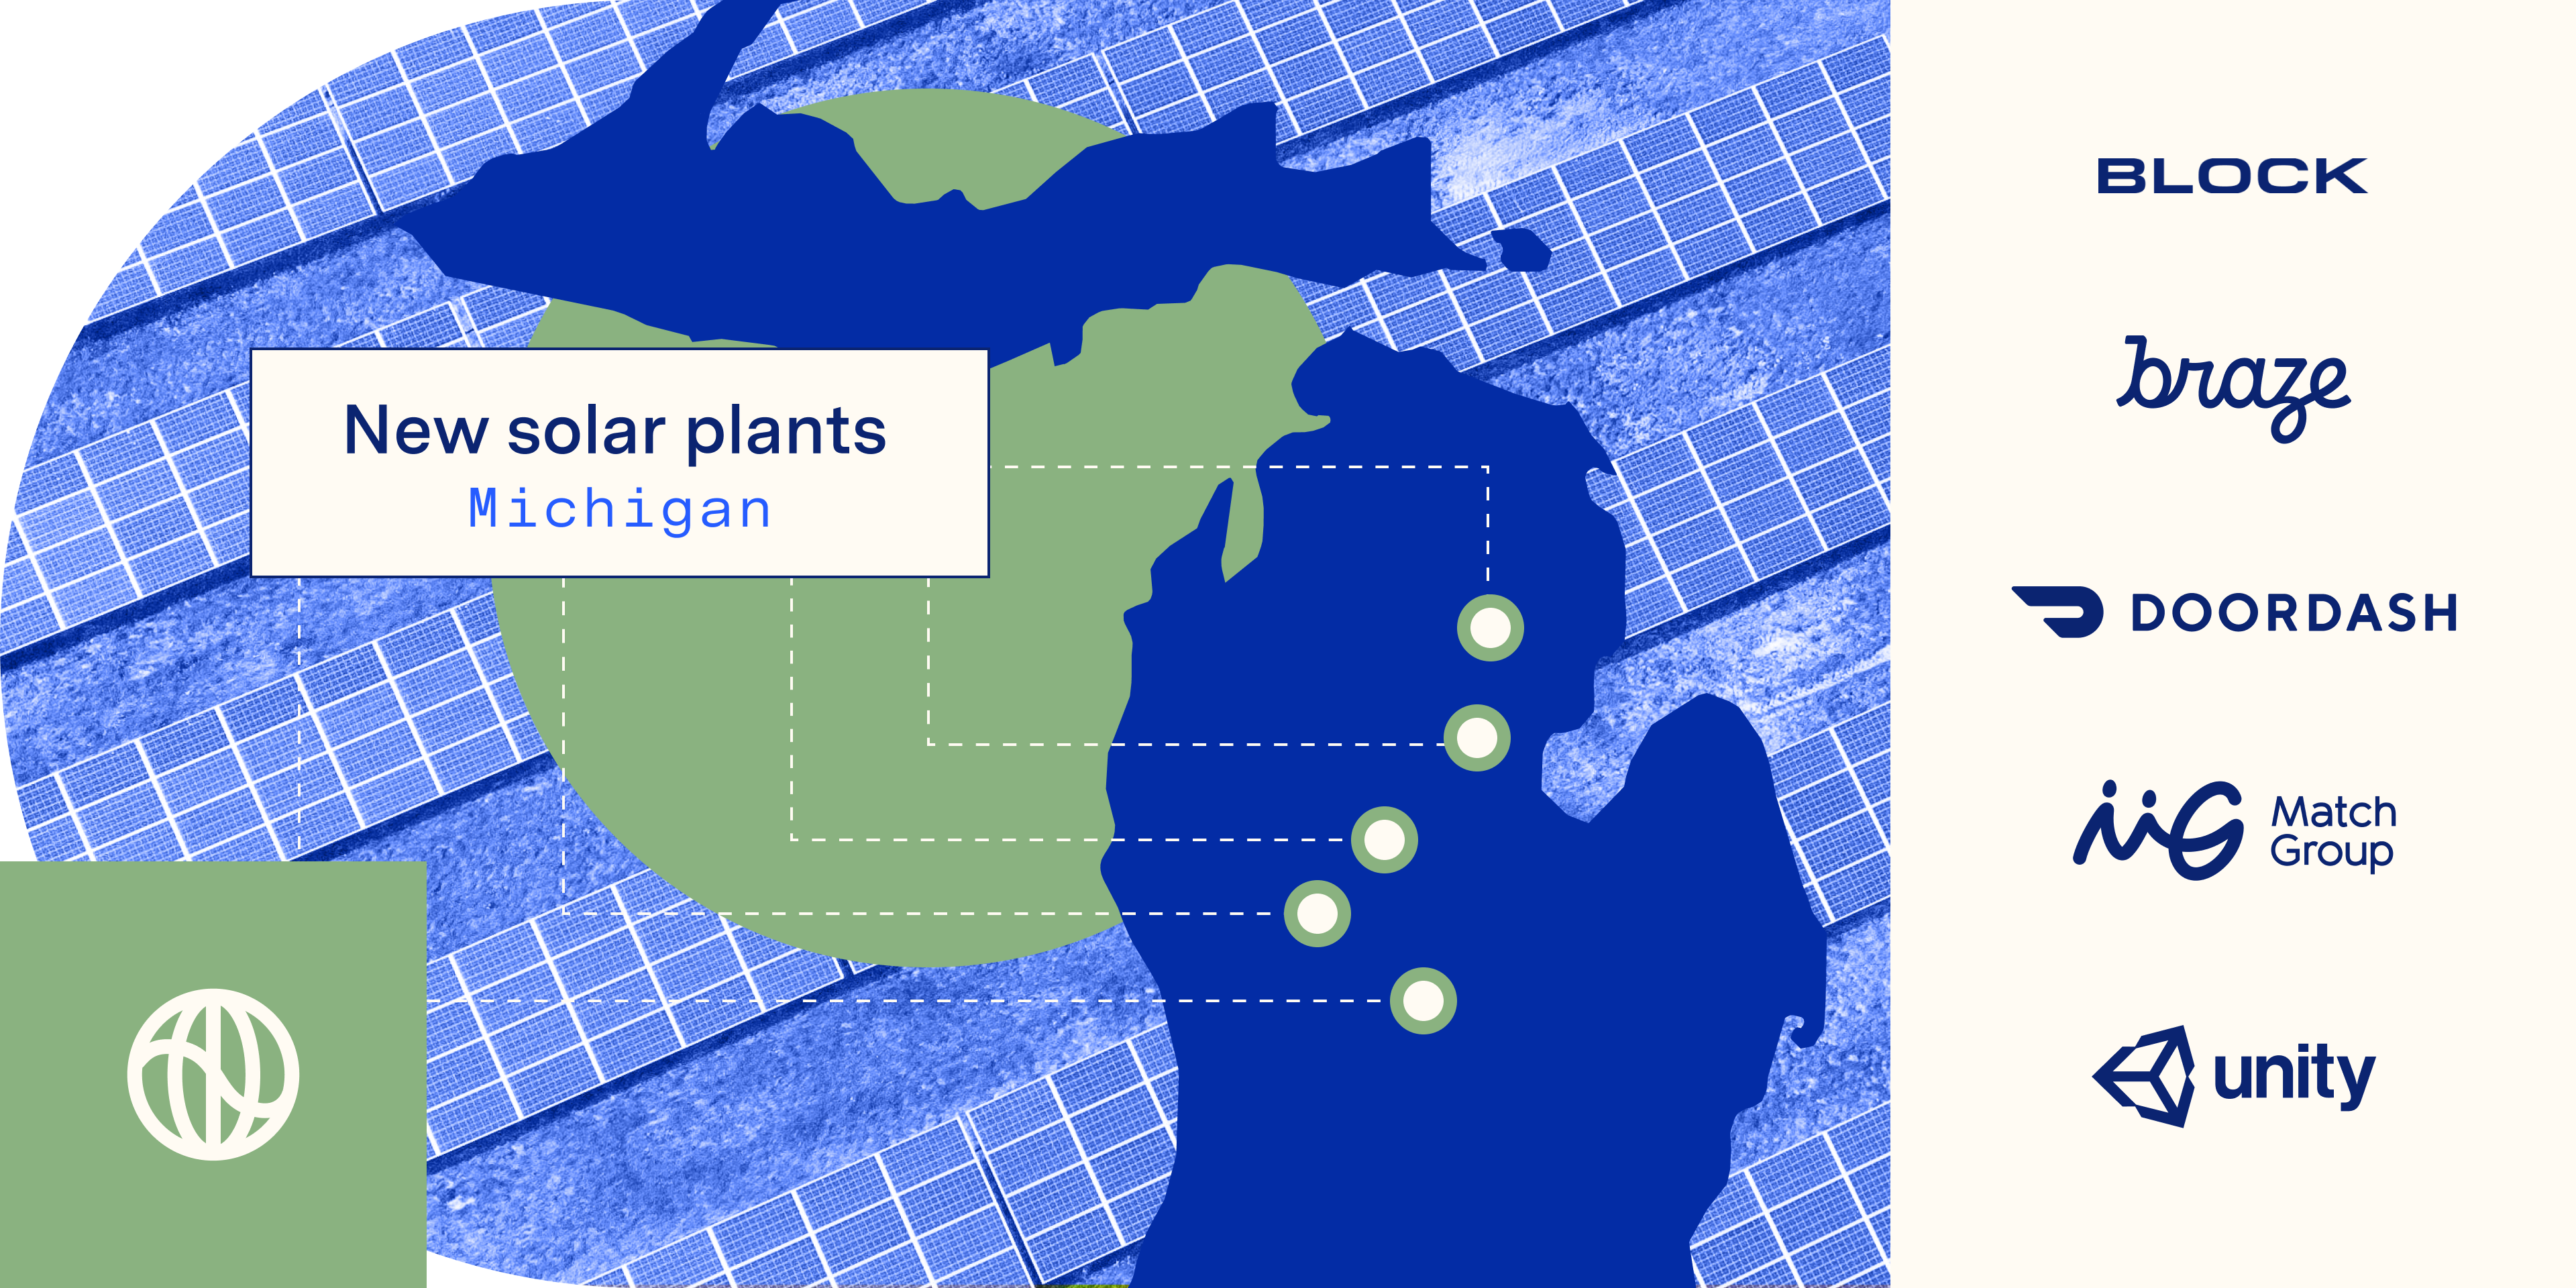 blog header image showing five new solar plants in Michigan partially funded by Block, Braze, DoorDash, Match Group, and Unity